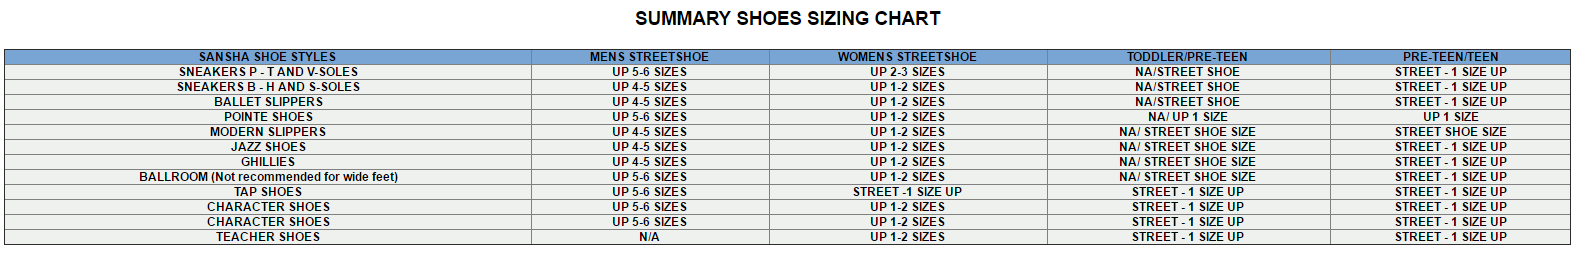 Easy Street Shoes Size Chart